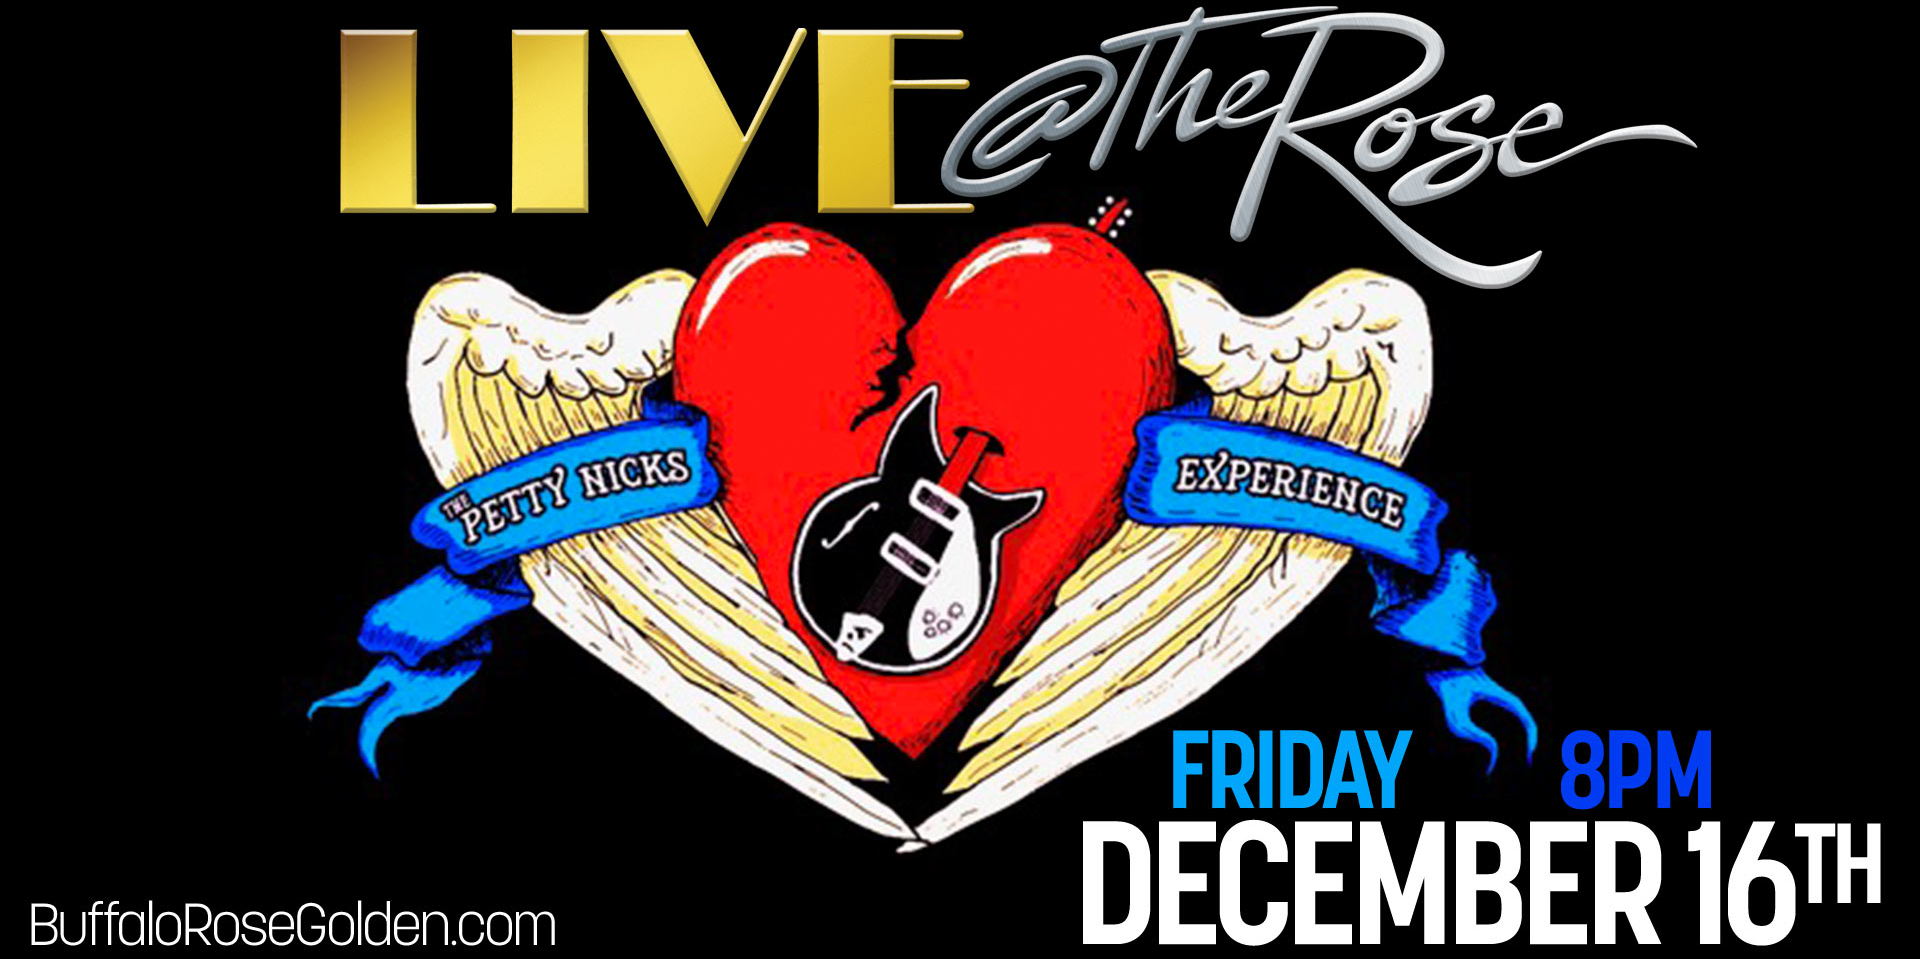 Live @ The Rose - Petty Nicks Experience promotional image